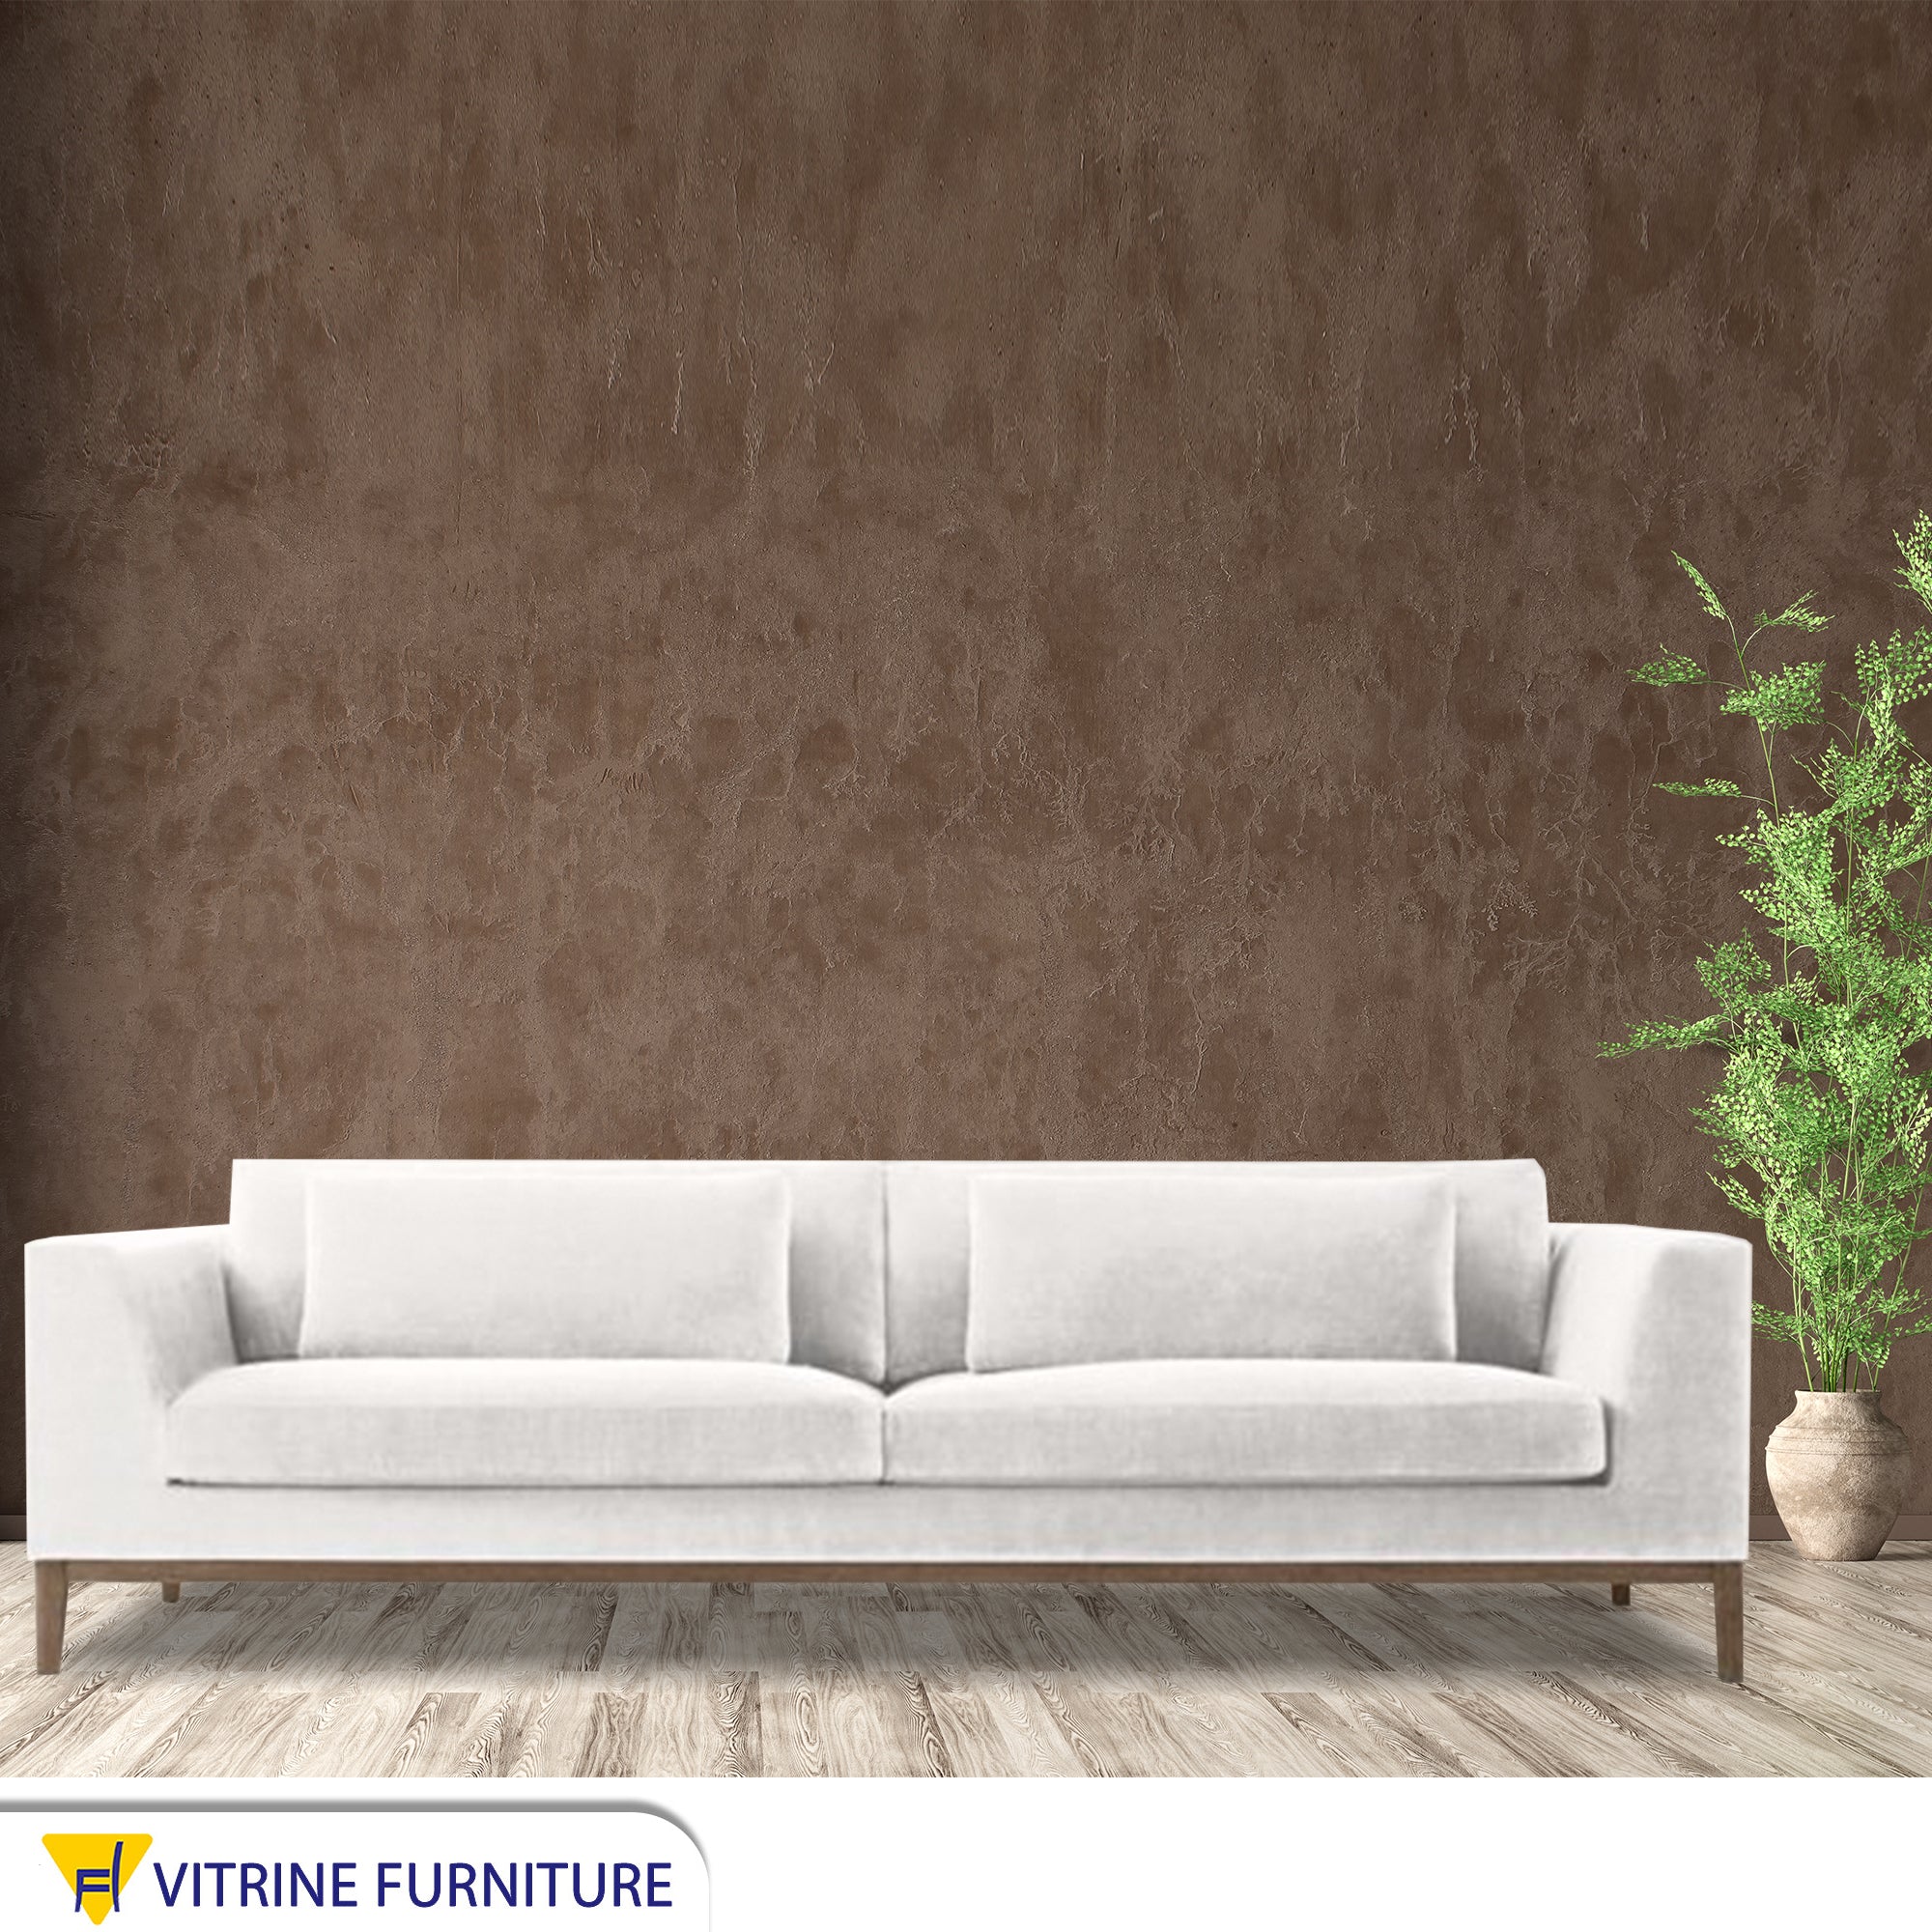 White sofa with movable back cushions